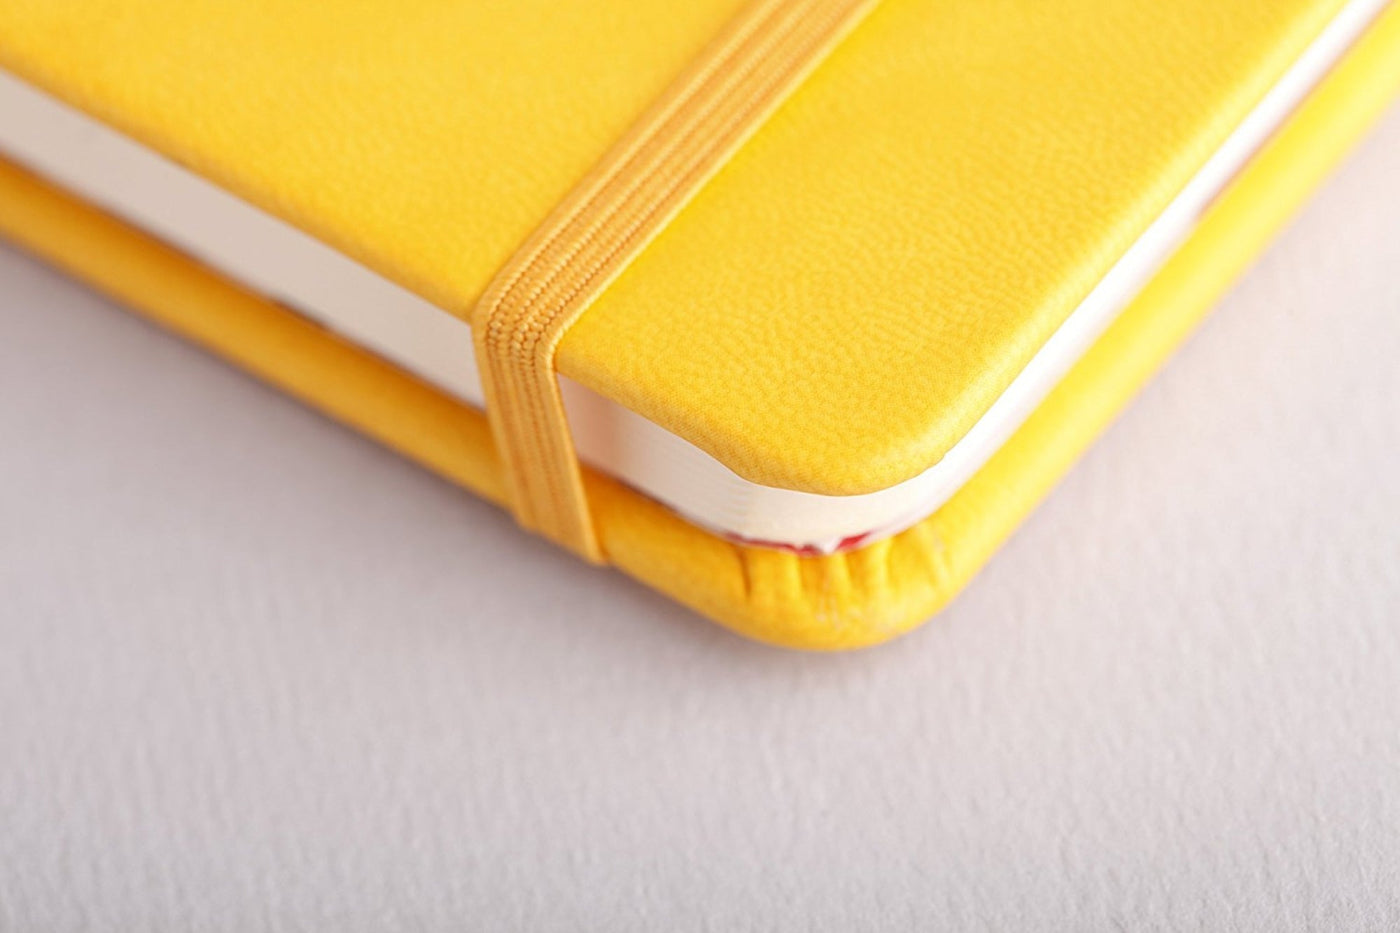 Rhodia Rhodiarama Soft Cover A6 Yellow Dotted Notebook Elastic Band